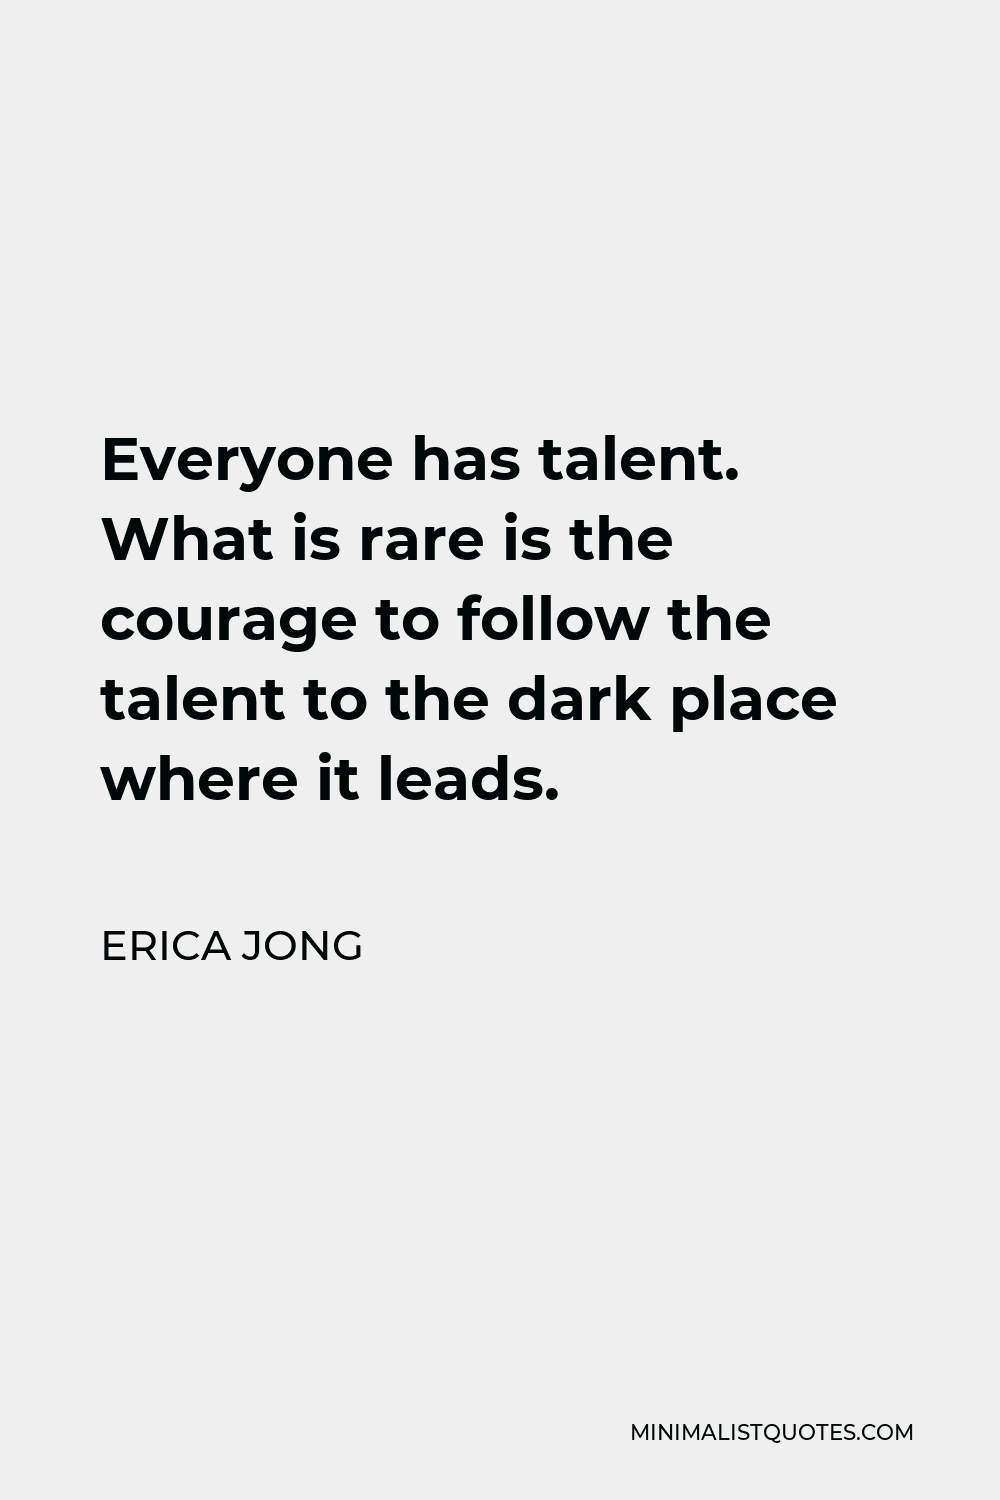 Erica Jong Quote - Everyone has talent. What is rare is the courage to follow the talent to the dark place where it leads.